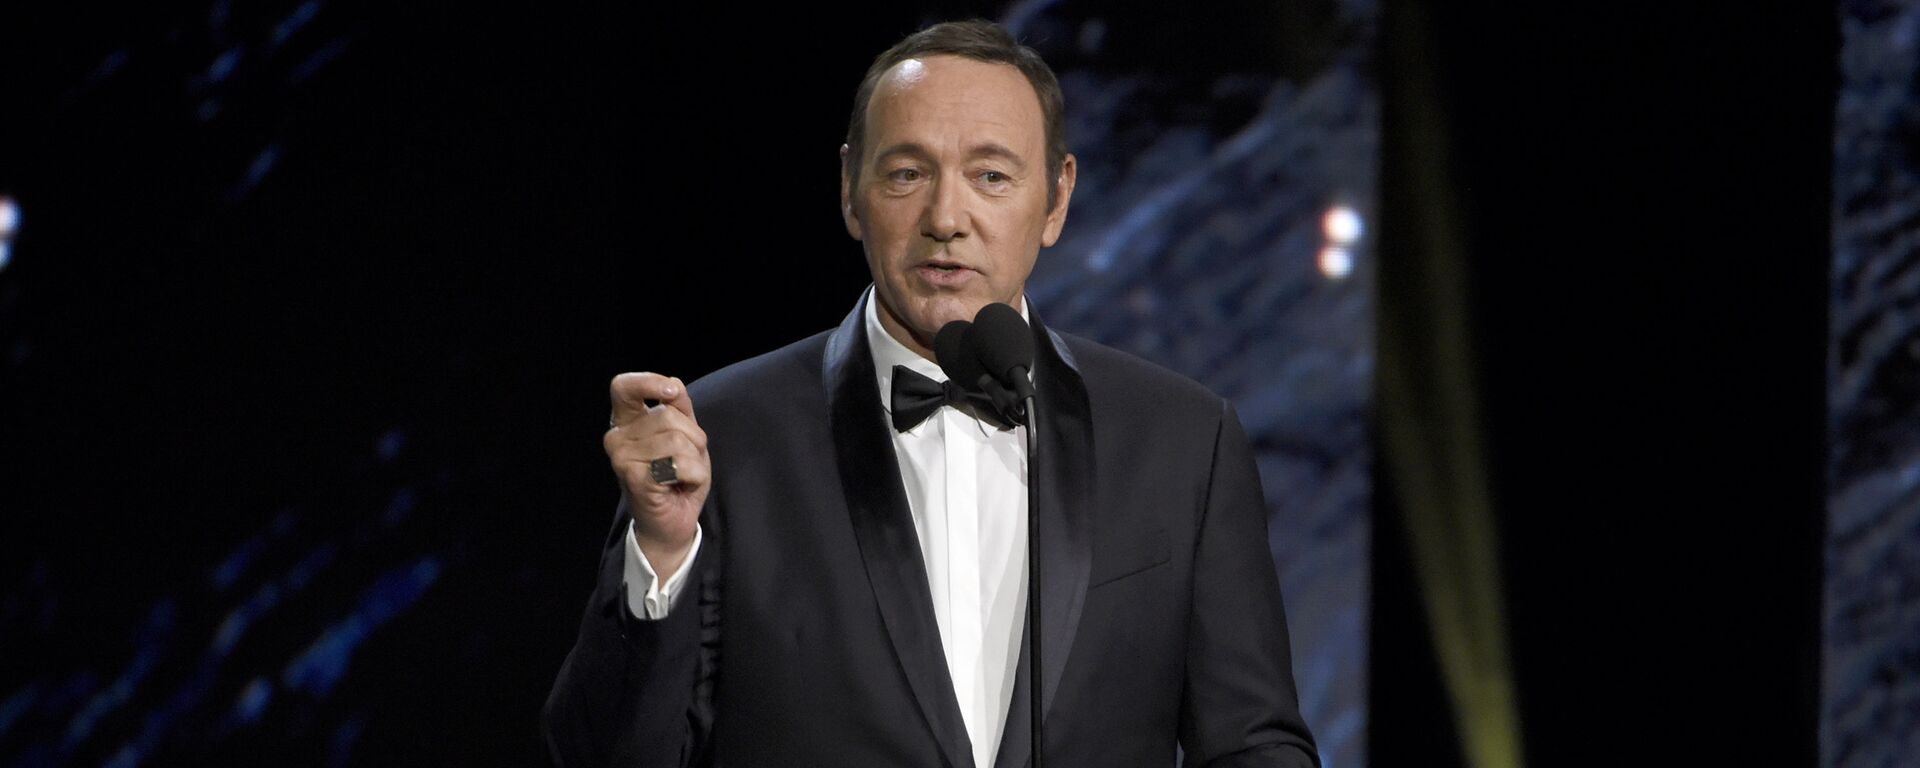 In this Oct. 27, 2017 photo, Kevin Spacey presents the award for excellence in television at the BAFTA Los Angeles Britannia Awards at the Beverly Hilton Hotel in Beverly Hills, Calif.  - Sputnik International, 1920, 04.05.2021